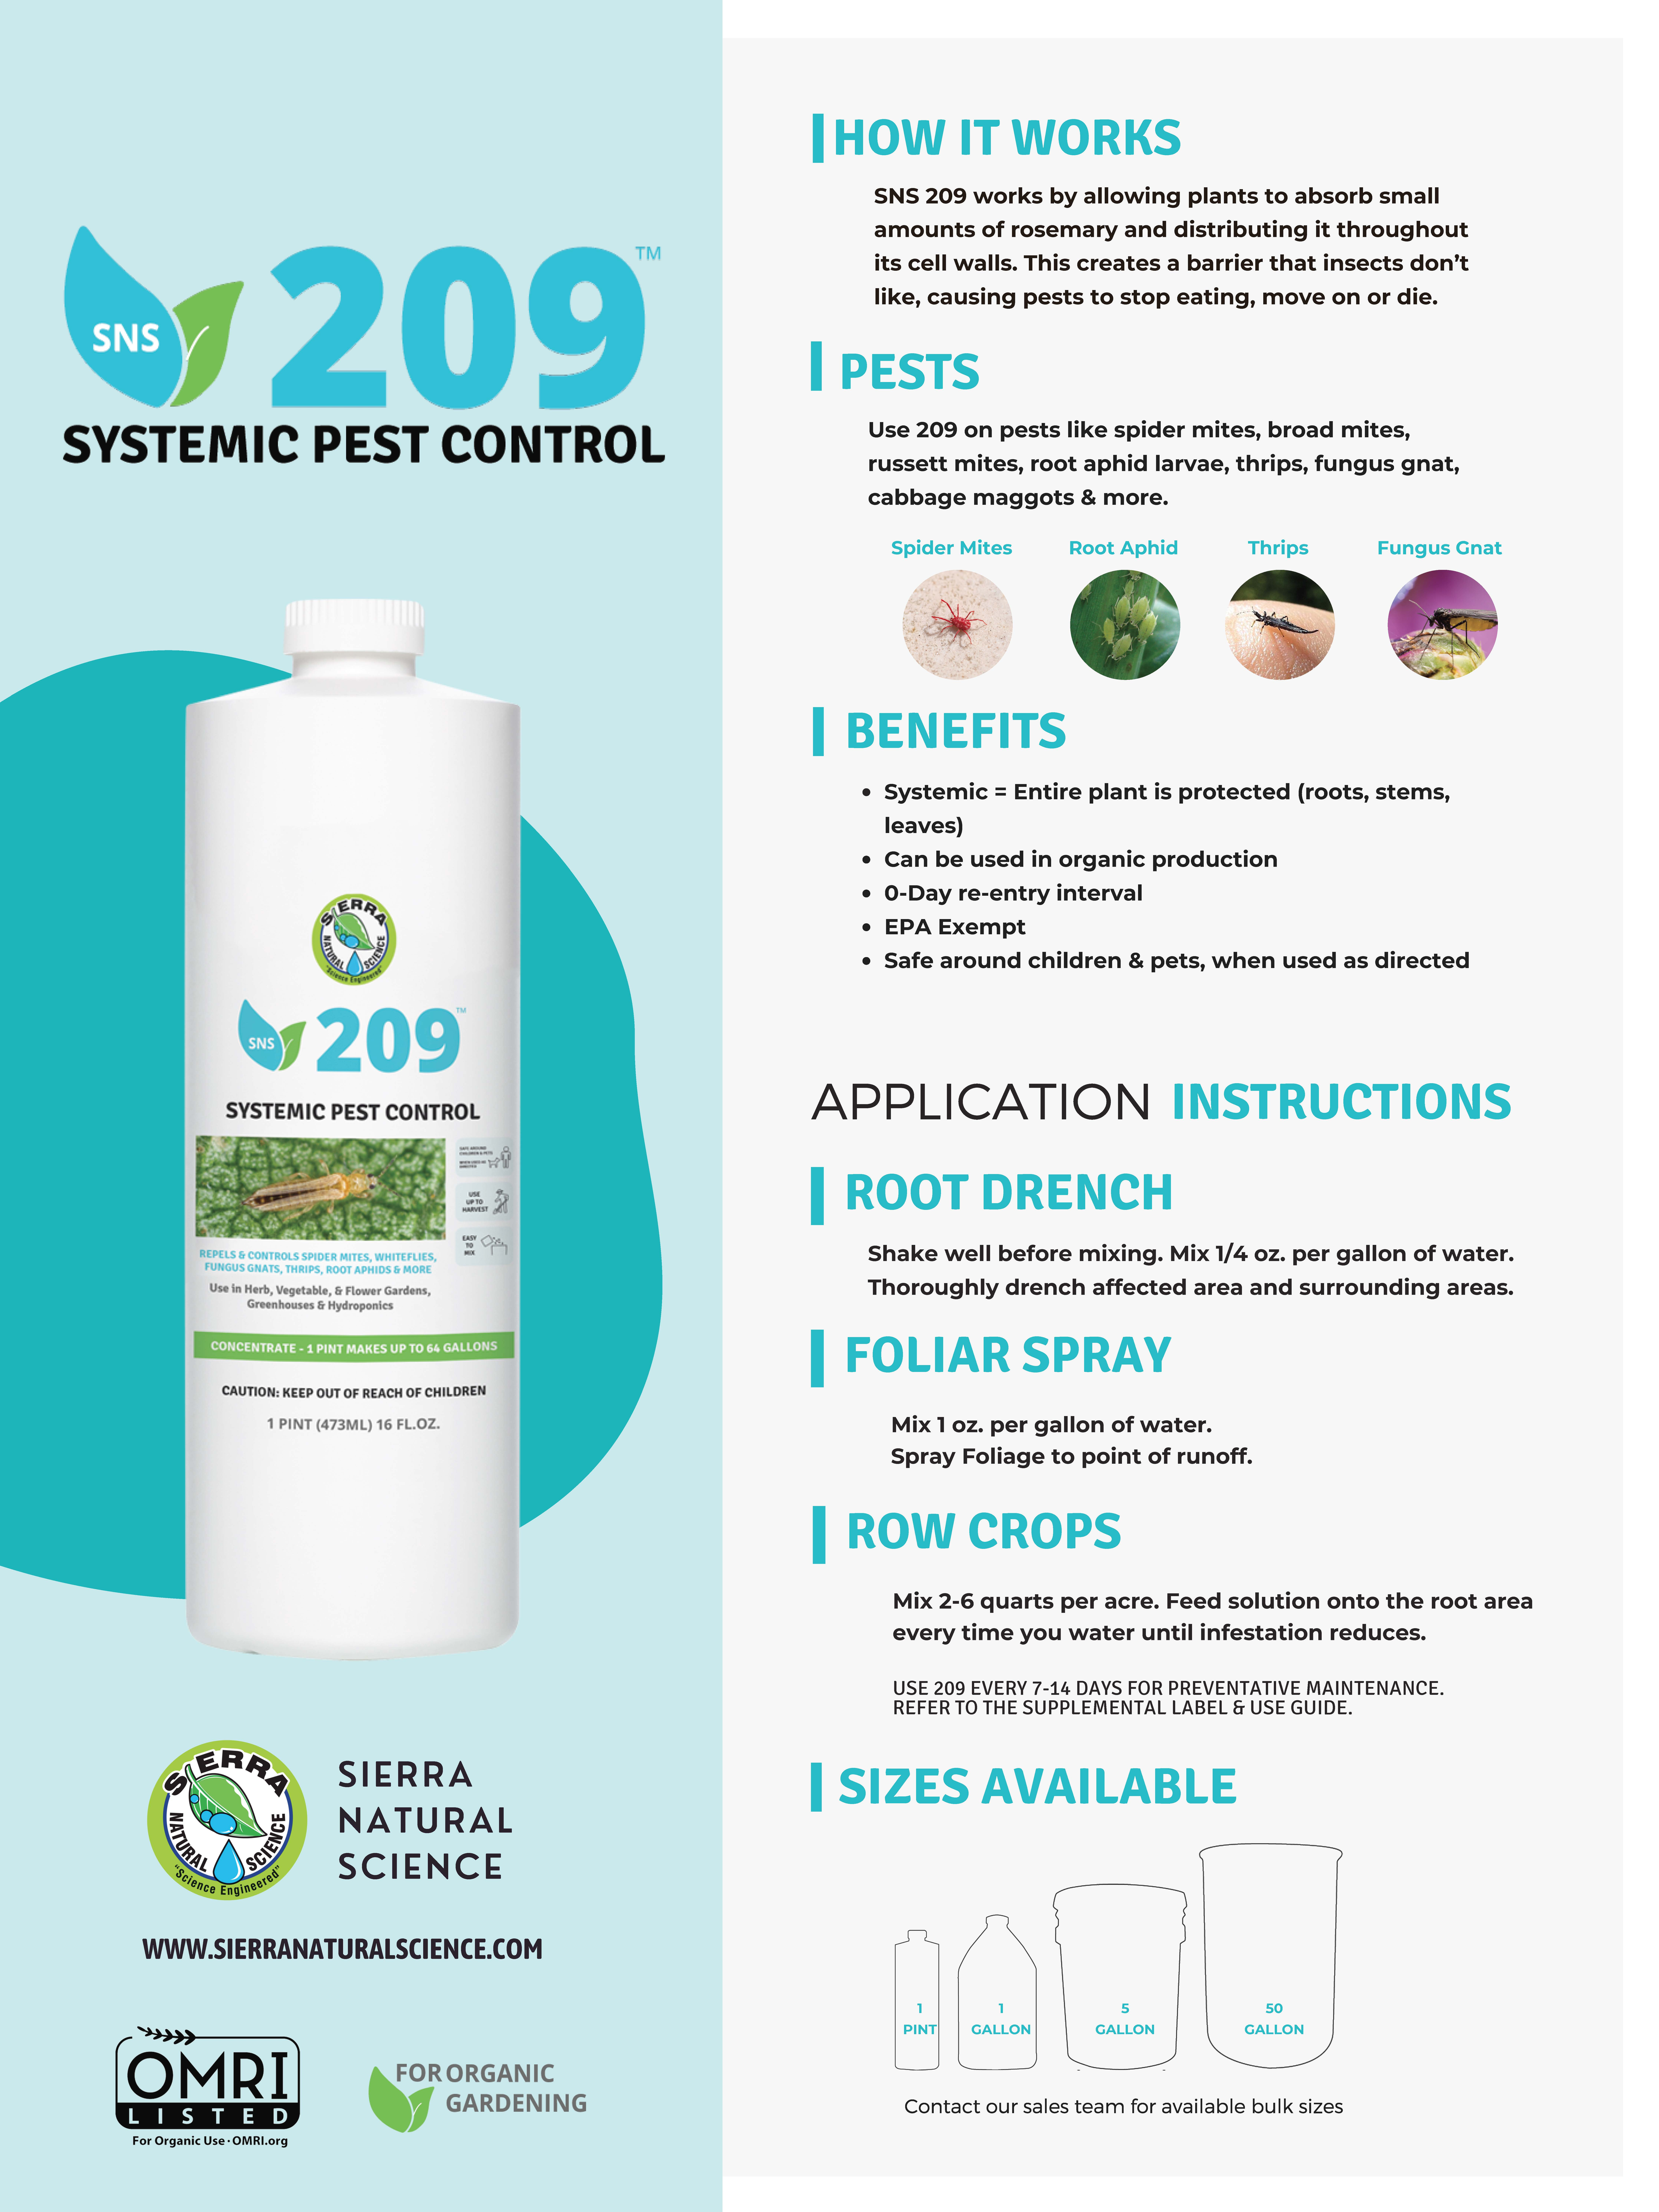 Informative Brochure for SNS 209 - Systemic Pest Control Concentrate